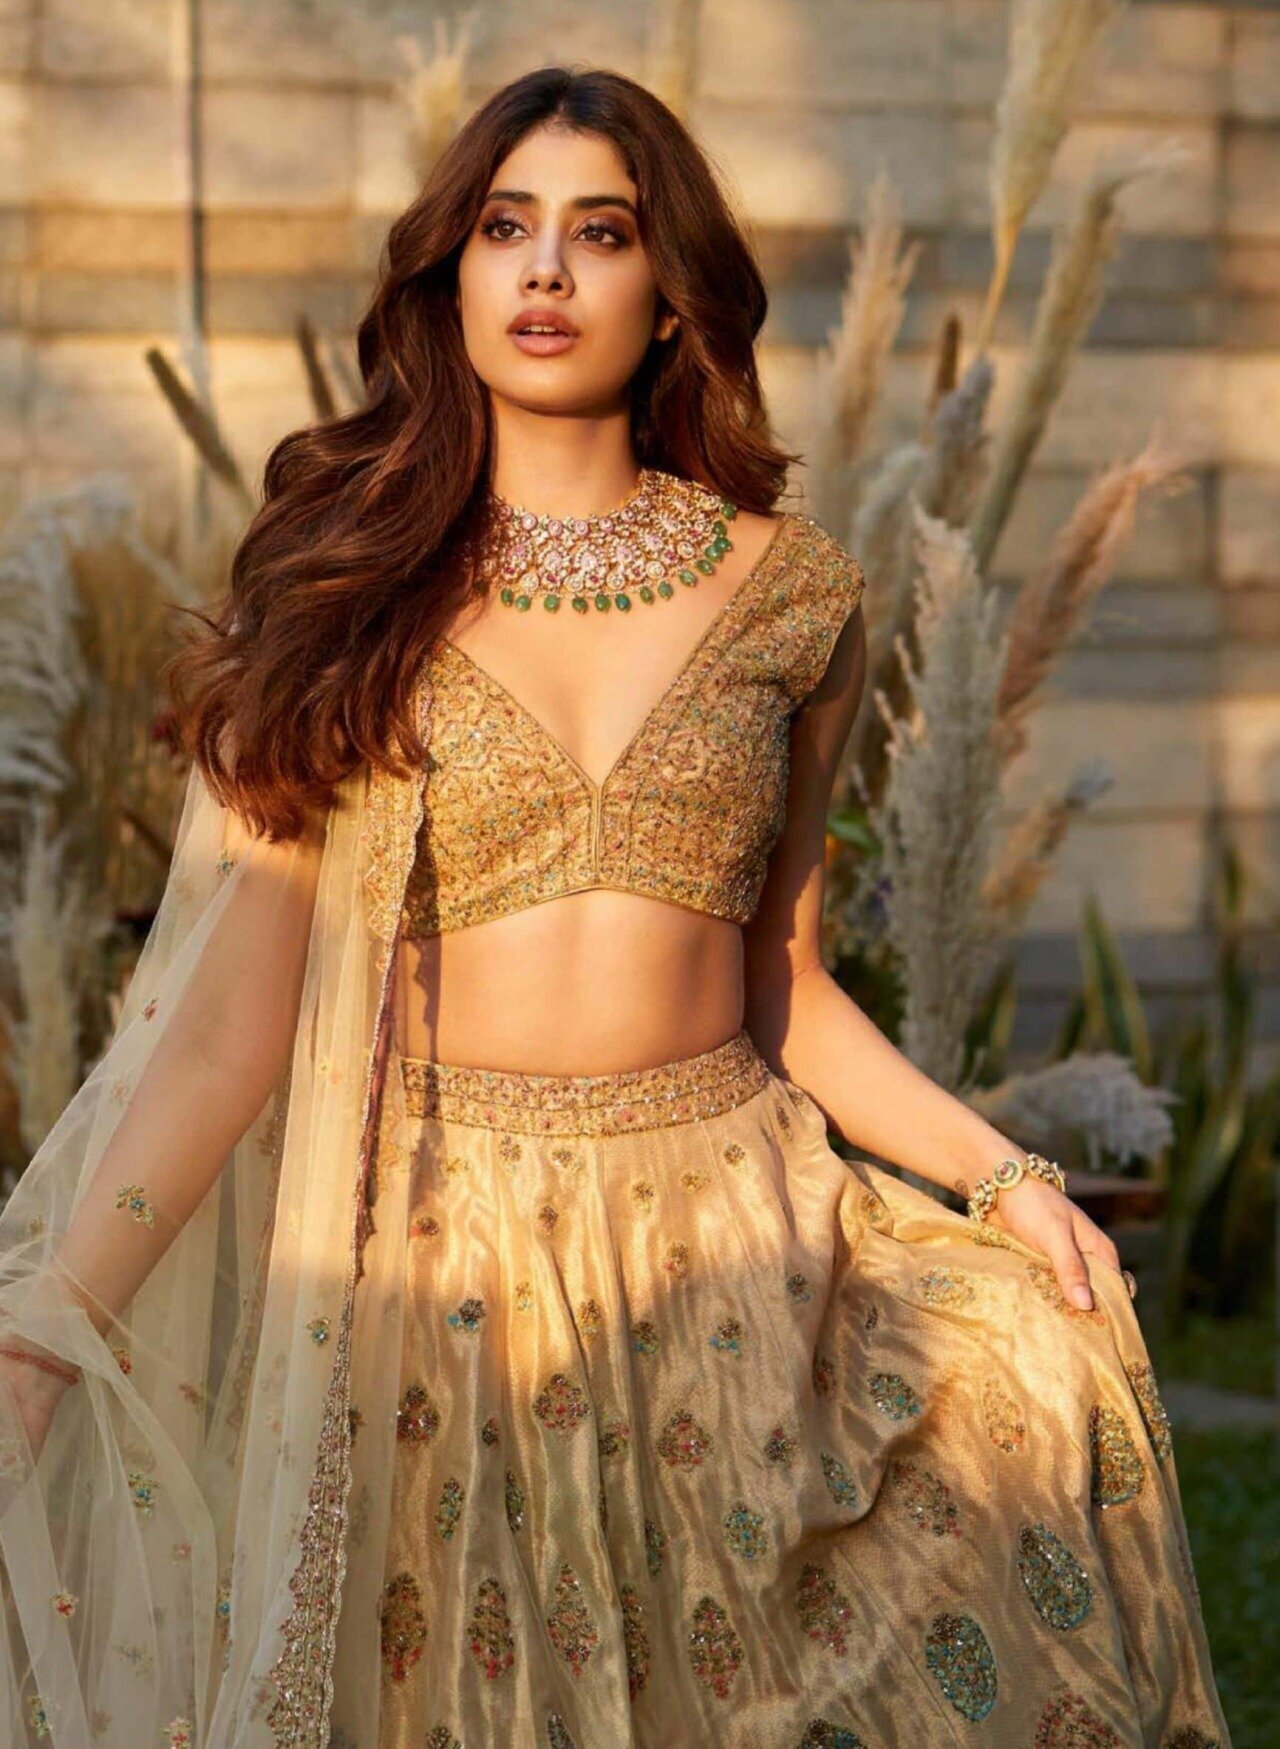 Janvhi Kapoor For Brides Today India 2020 Photoshoot | Picture 1767341